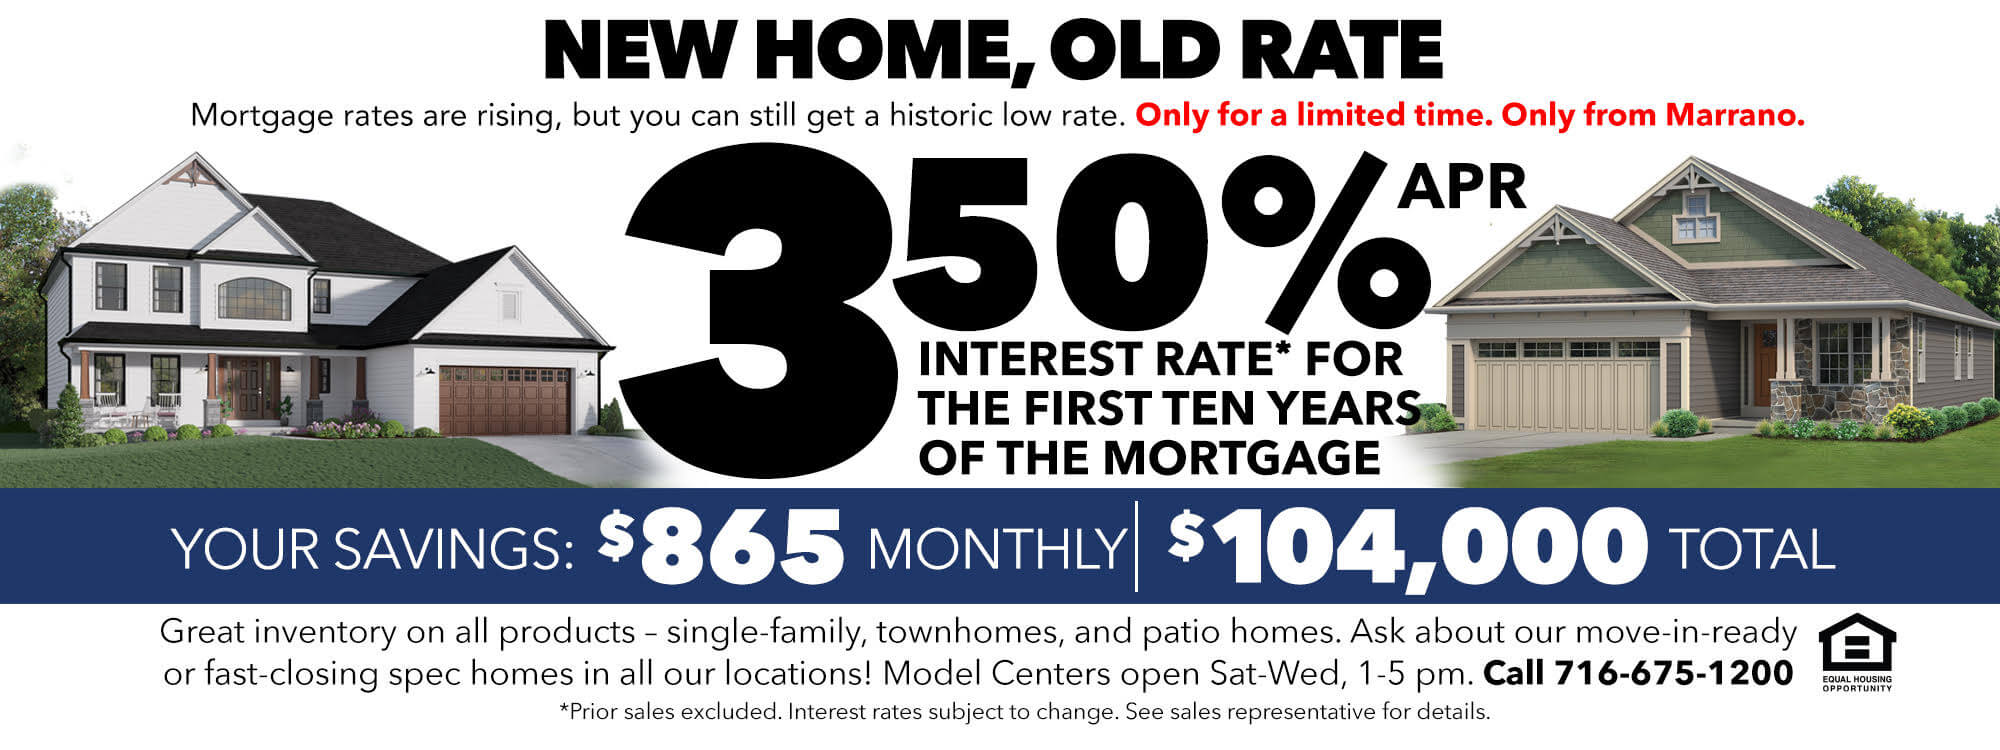 Marrano Introduces the “Great Rate Buydown 3.50% APR Mortgage Program